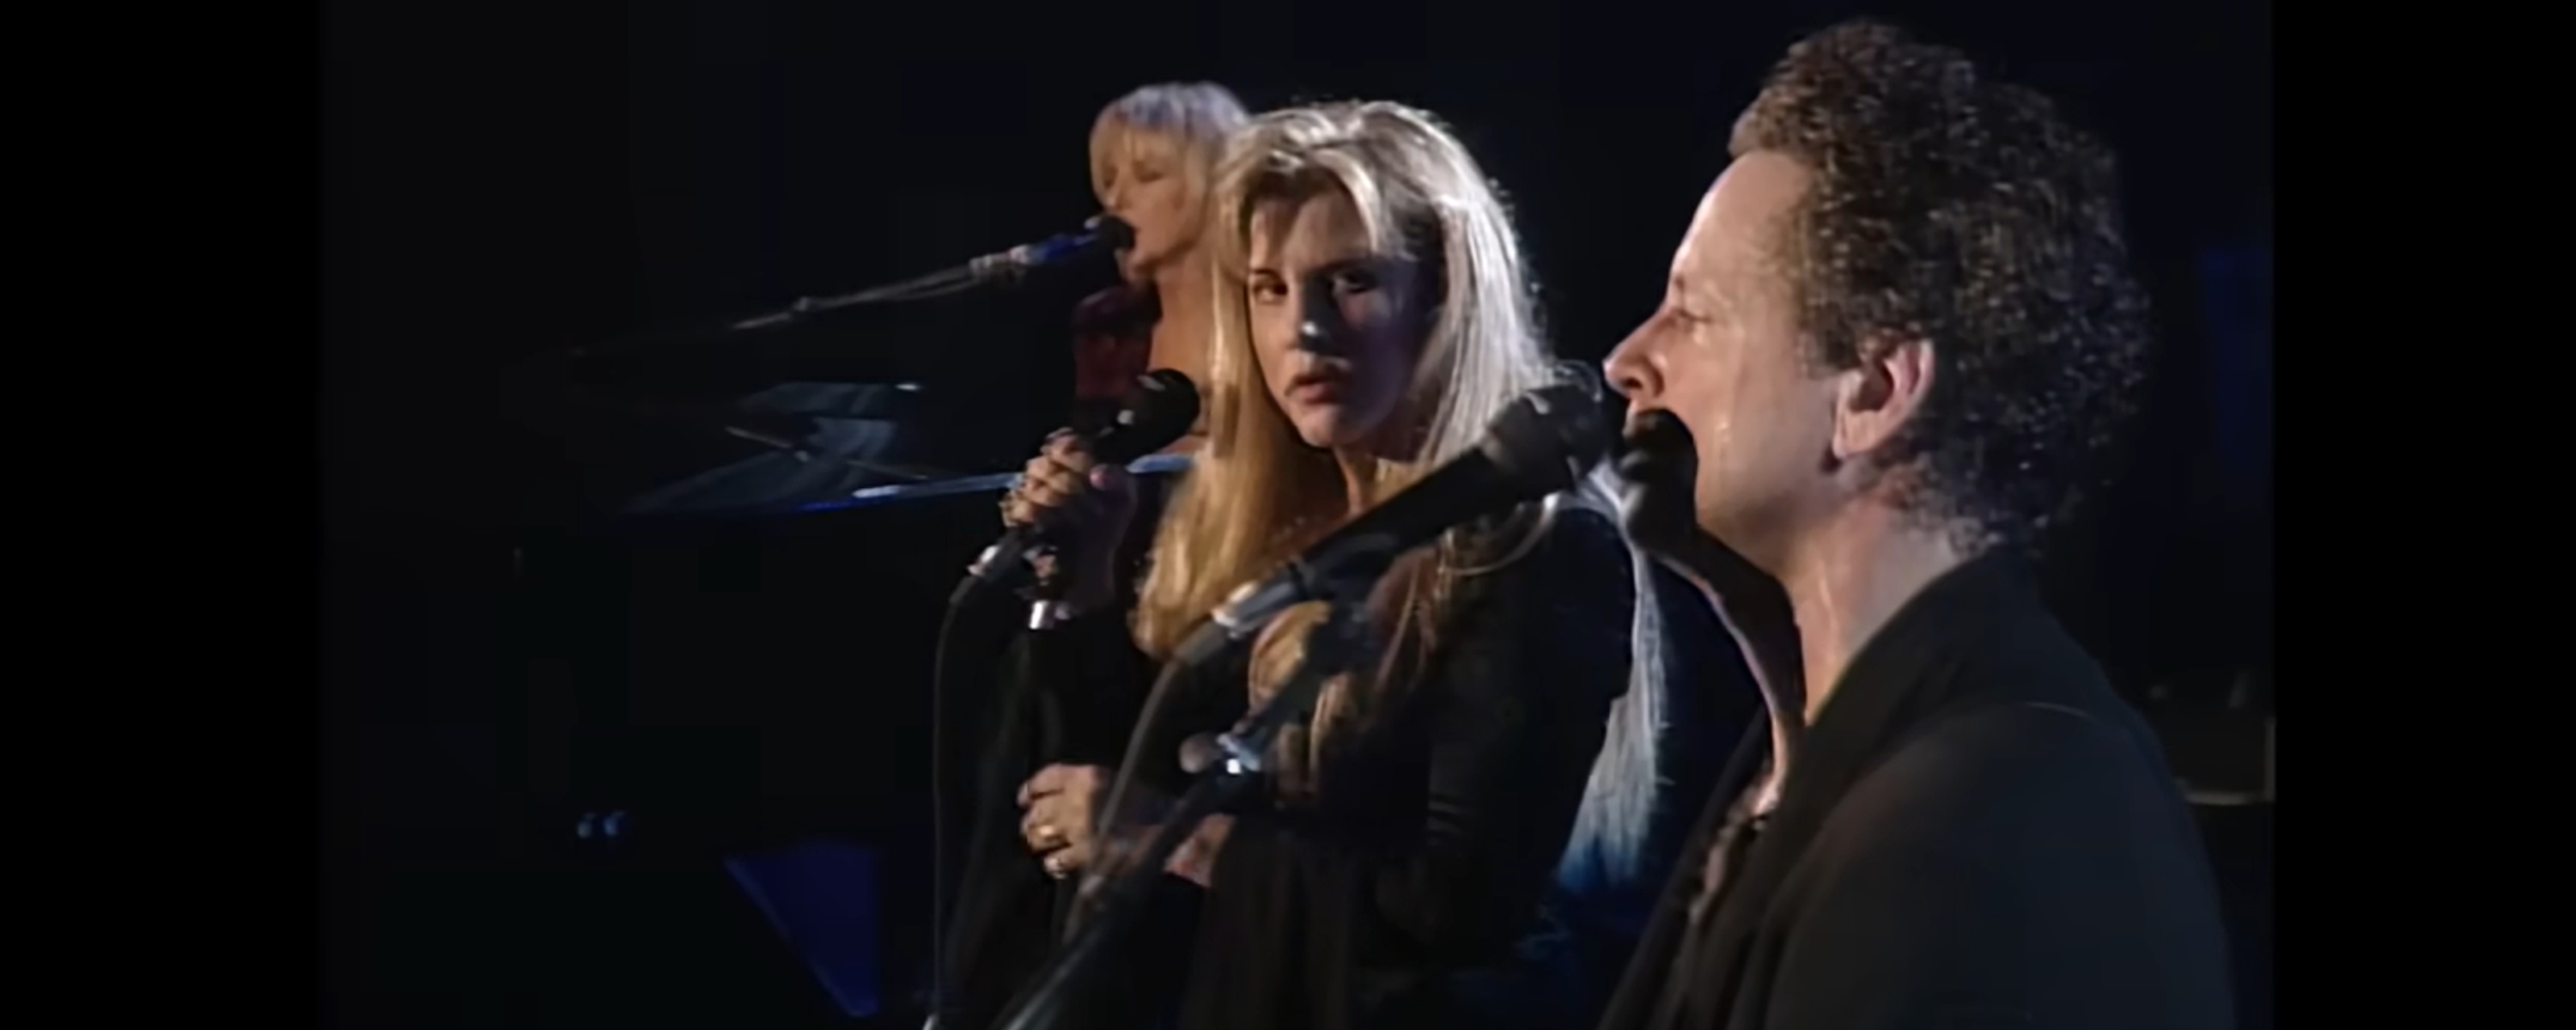 Remember When Stevie Nicks Burned a Hole Through Lindsey Buckingham With Her Gaze During This 1997 “Silver Springs” Performance